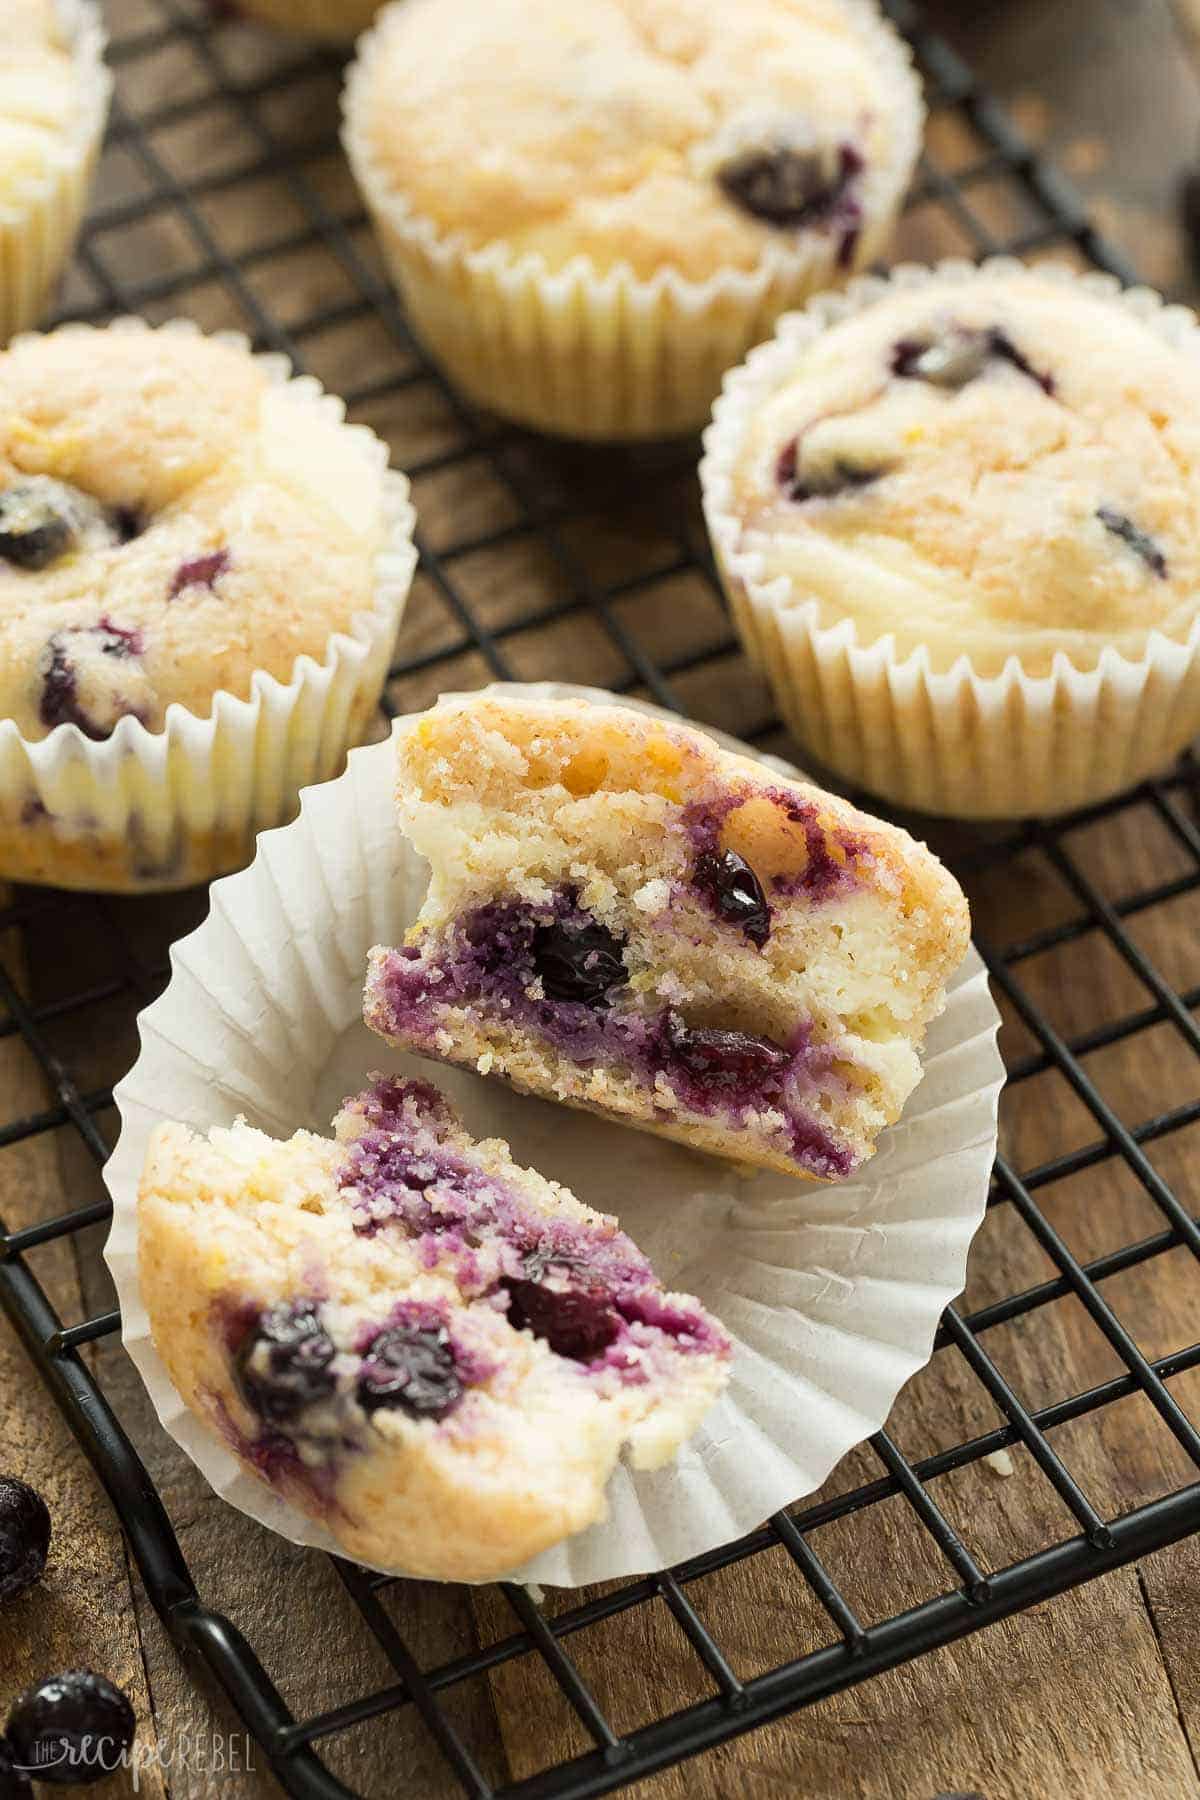 These Blueberry Lemon Muffins with Cream Cheese Swirl are a little sweet, a little tangy and perfect for breakfast or snack! Easy to make ahead and freezer friendly. Includes step by step recipe video. | lemon recipe | lemon bread | berries | yogurt muffins | breakfast | brunch | cream cheese muffins